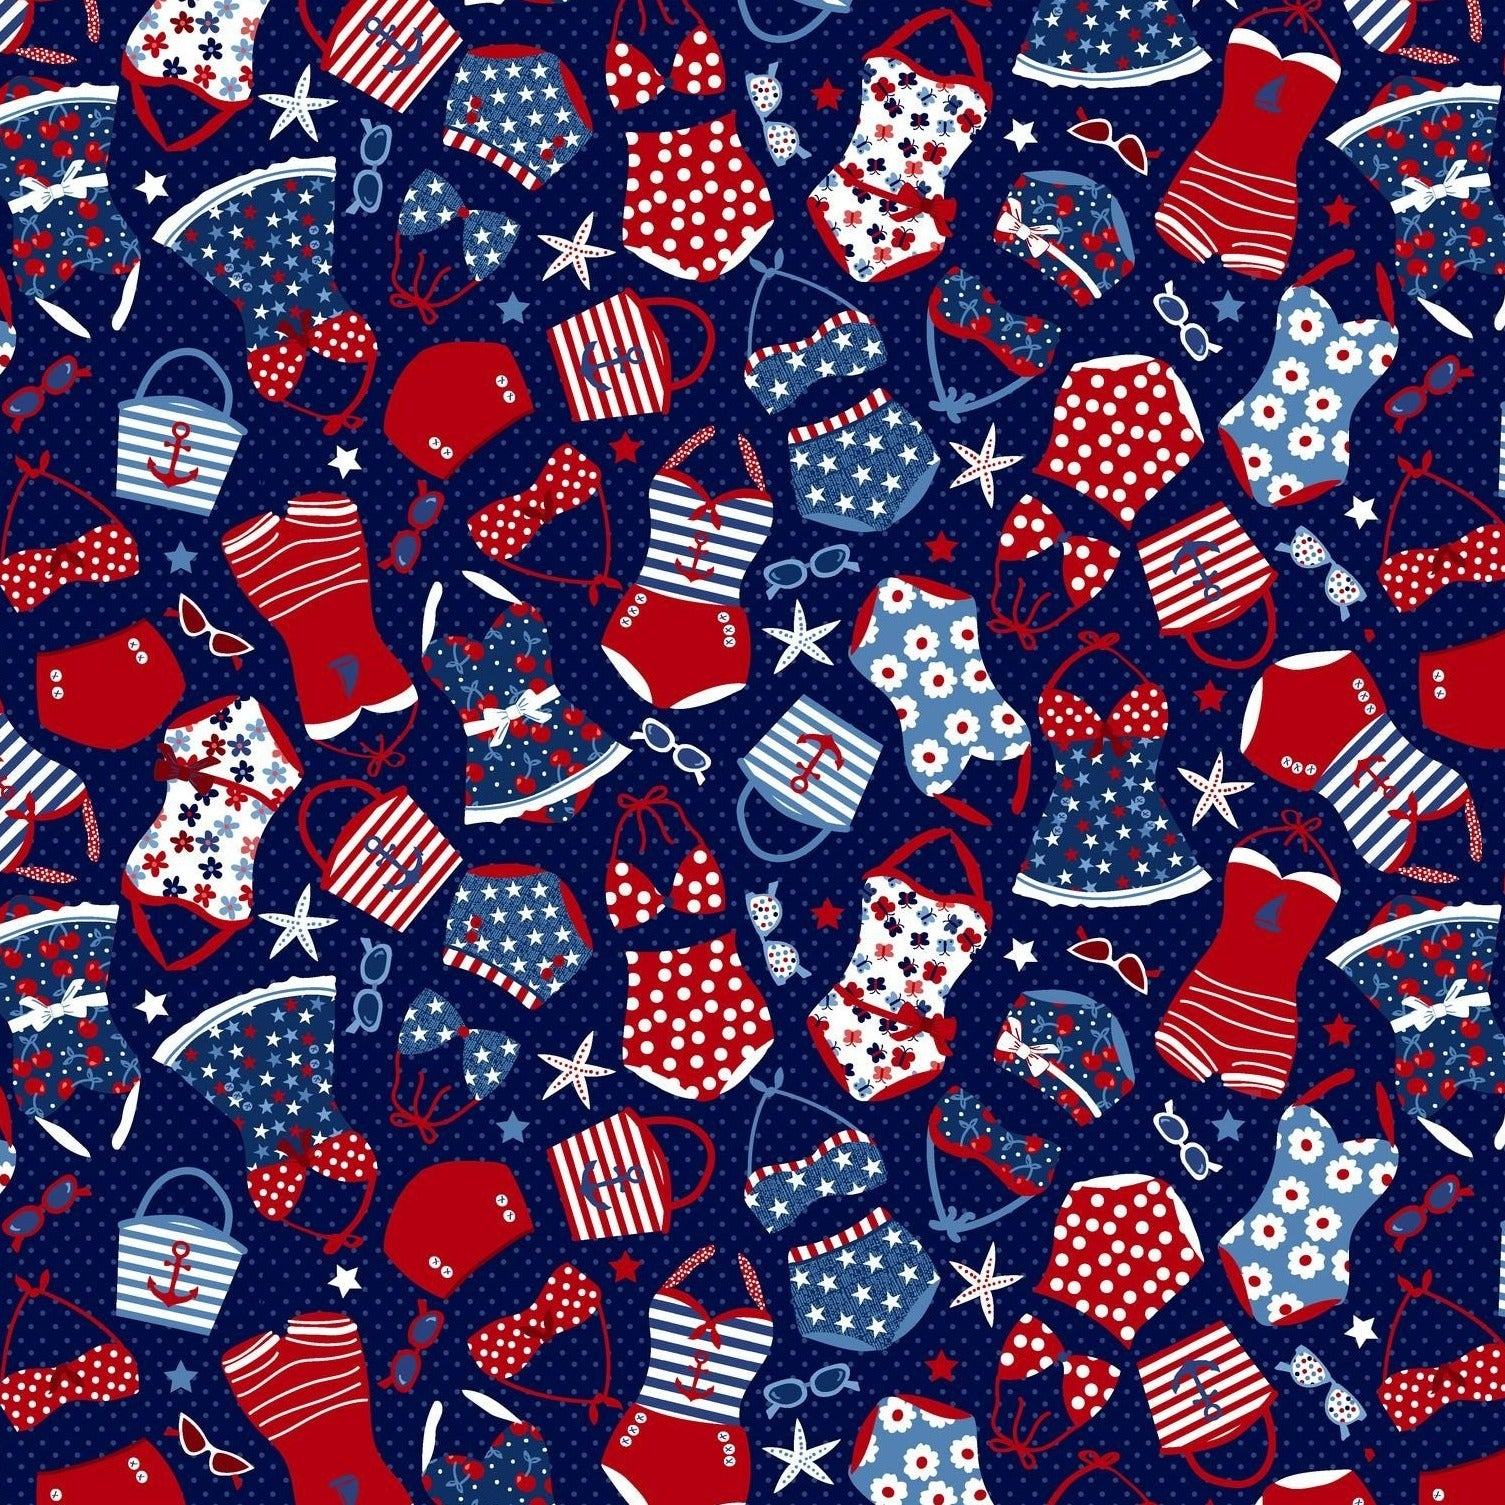 Star Spangled Bathing Suits